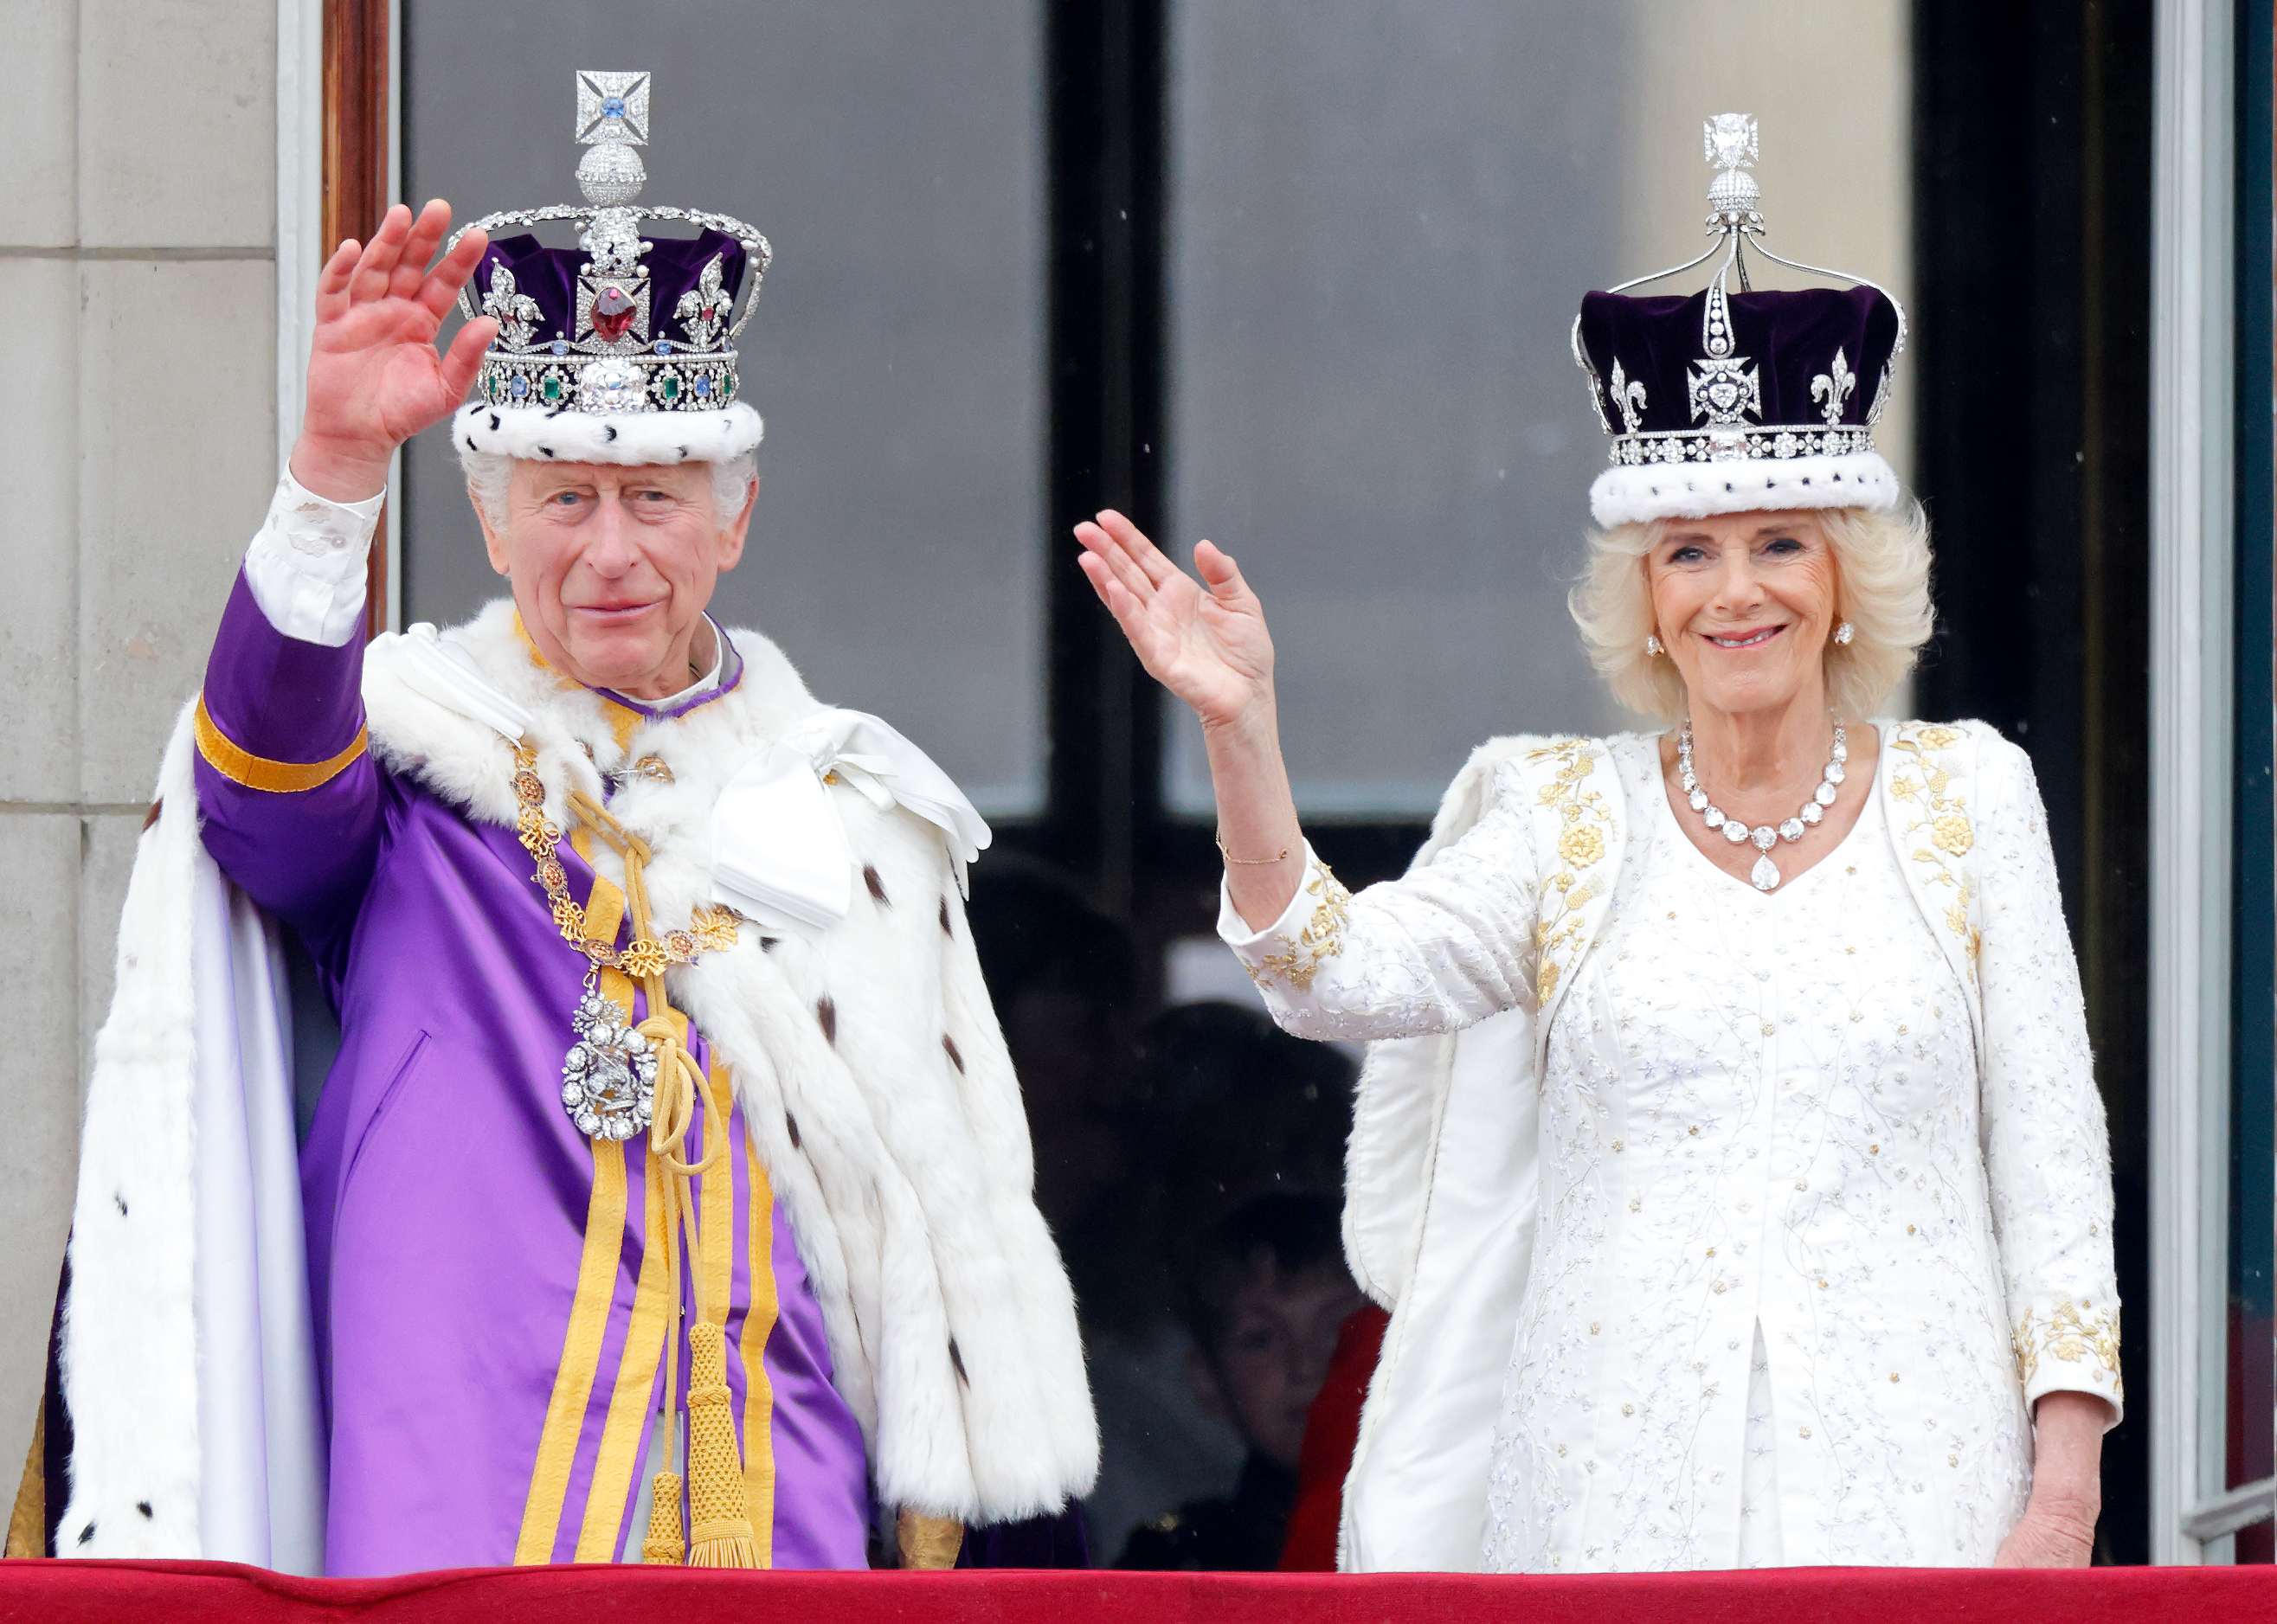 King Charles III and Queen Camilla after their Coronation in London, England on May 6, 2023. | Source: Getty Images